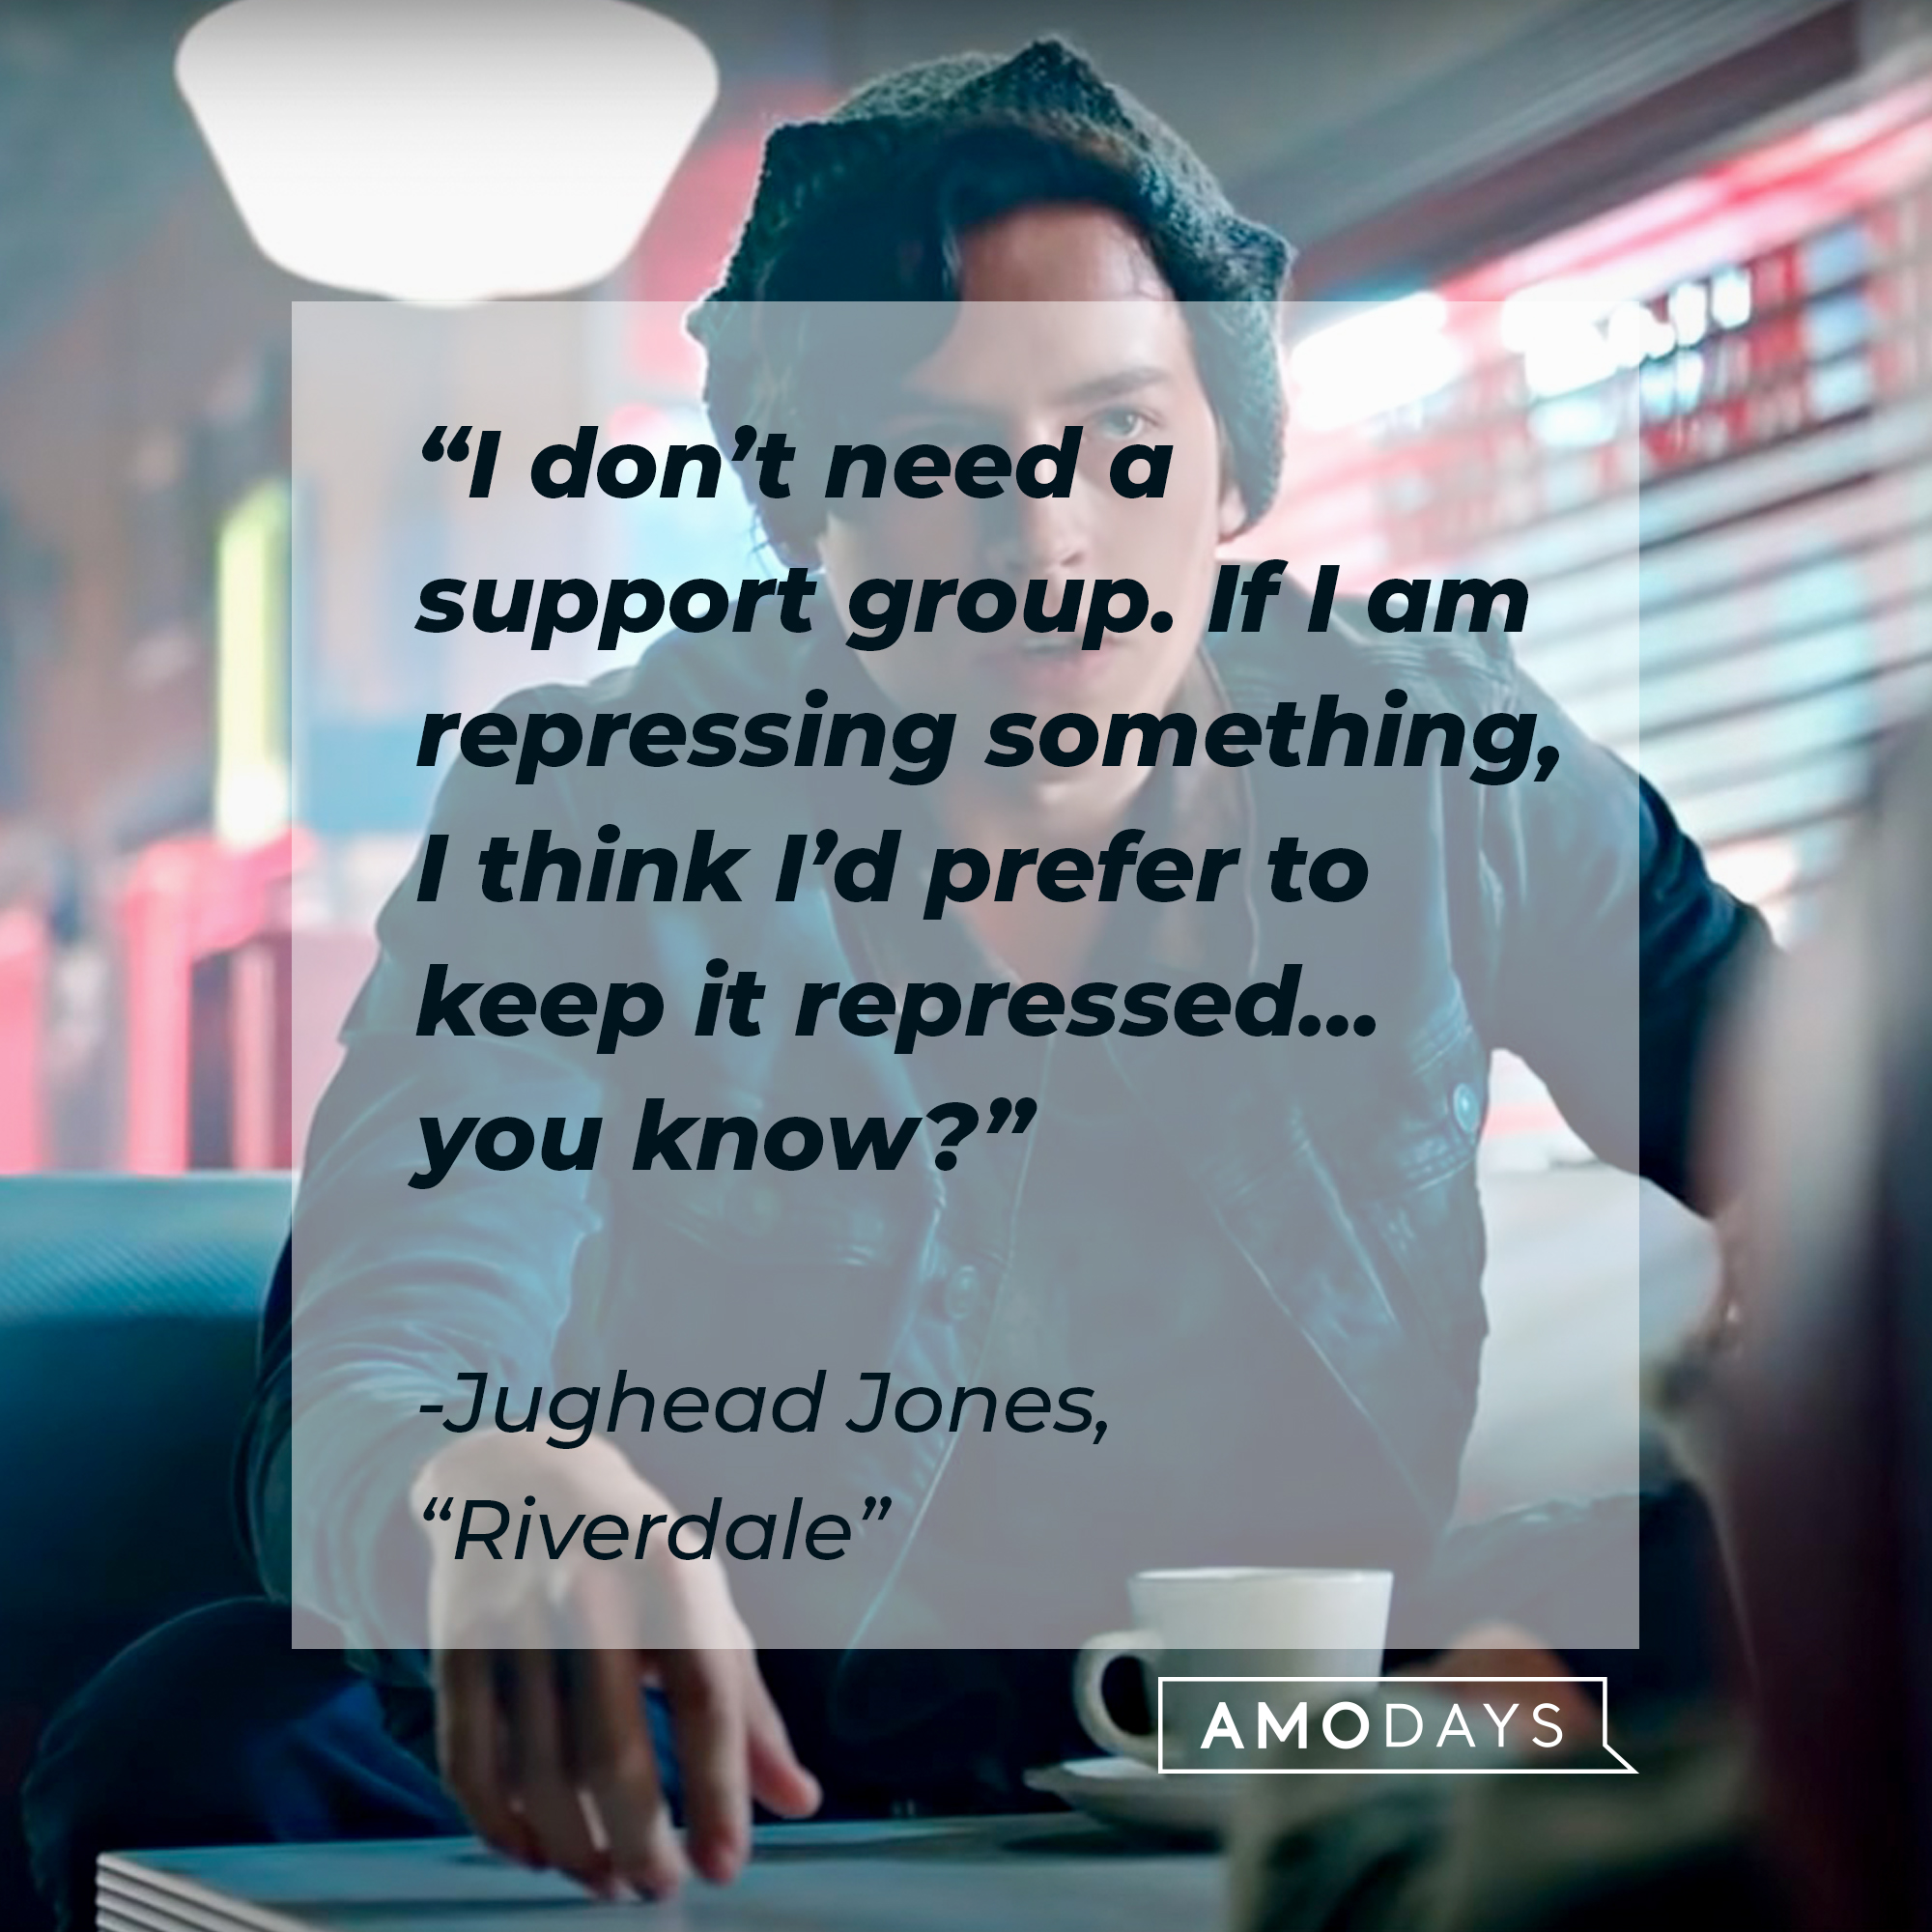 Image of Cole Sprouse as Judhead Jones in "Riverdale" with the quote: “I don’t need a support group. If I am repressing something, I think I’d prefer to keep it repressed… you know?” | Source: facebook.com/Riverdale